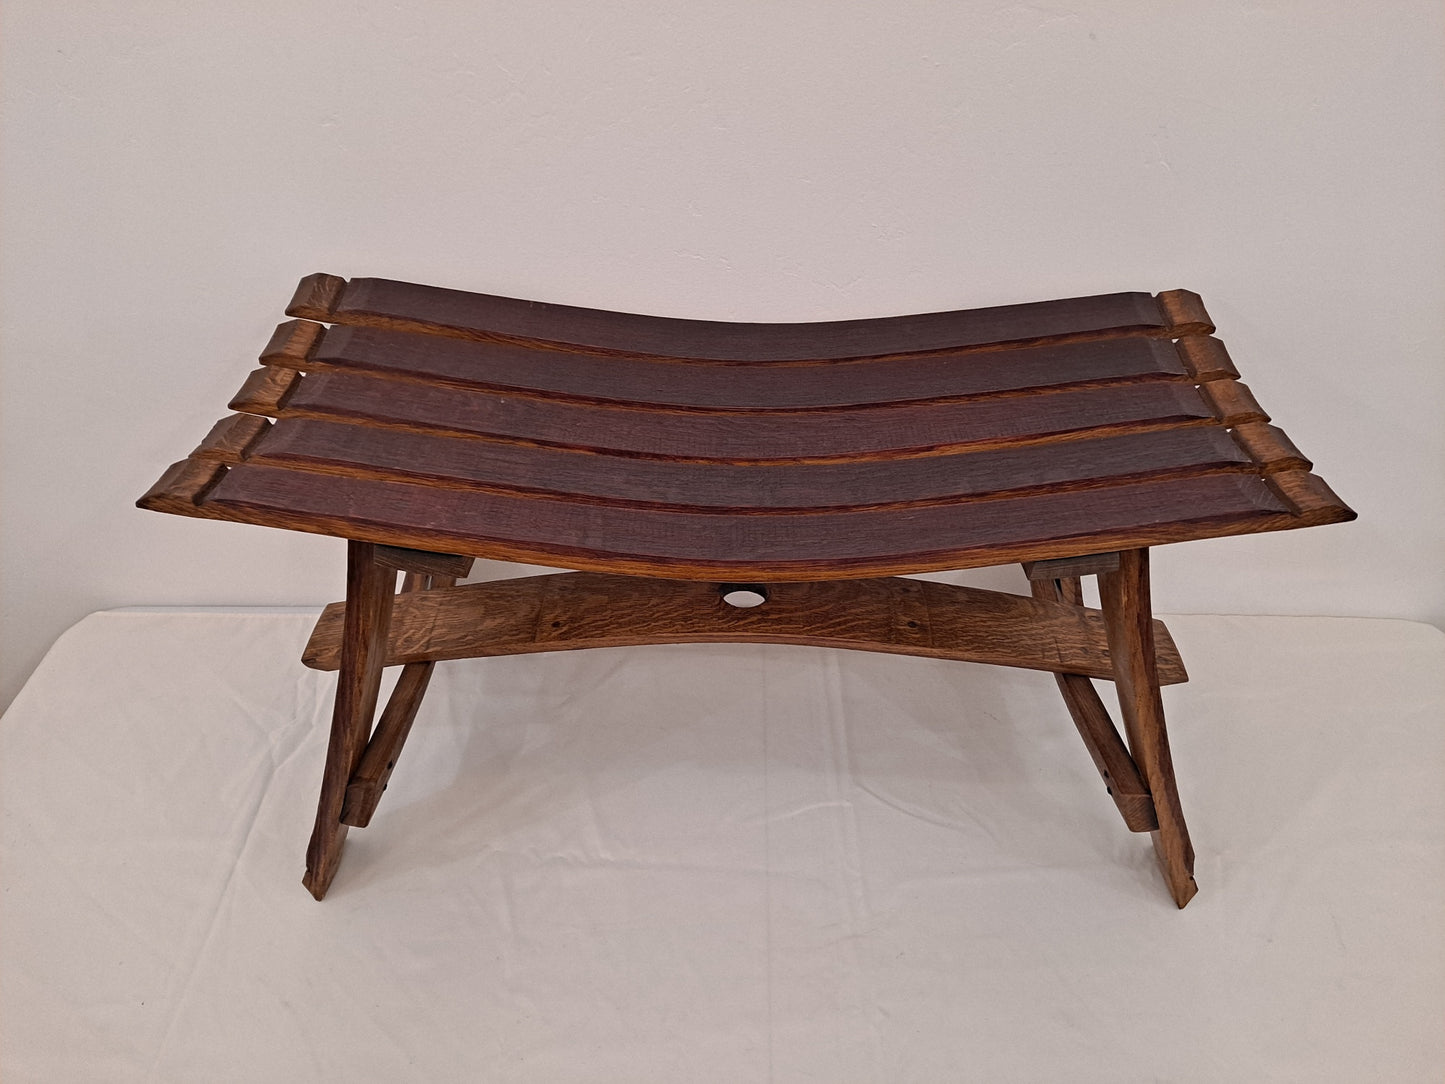 Bench from Wine Barrel Staves